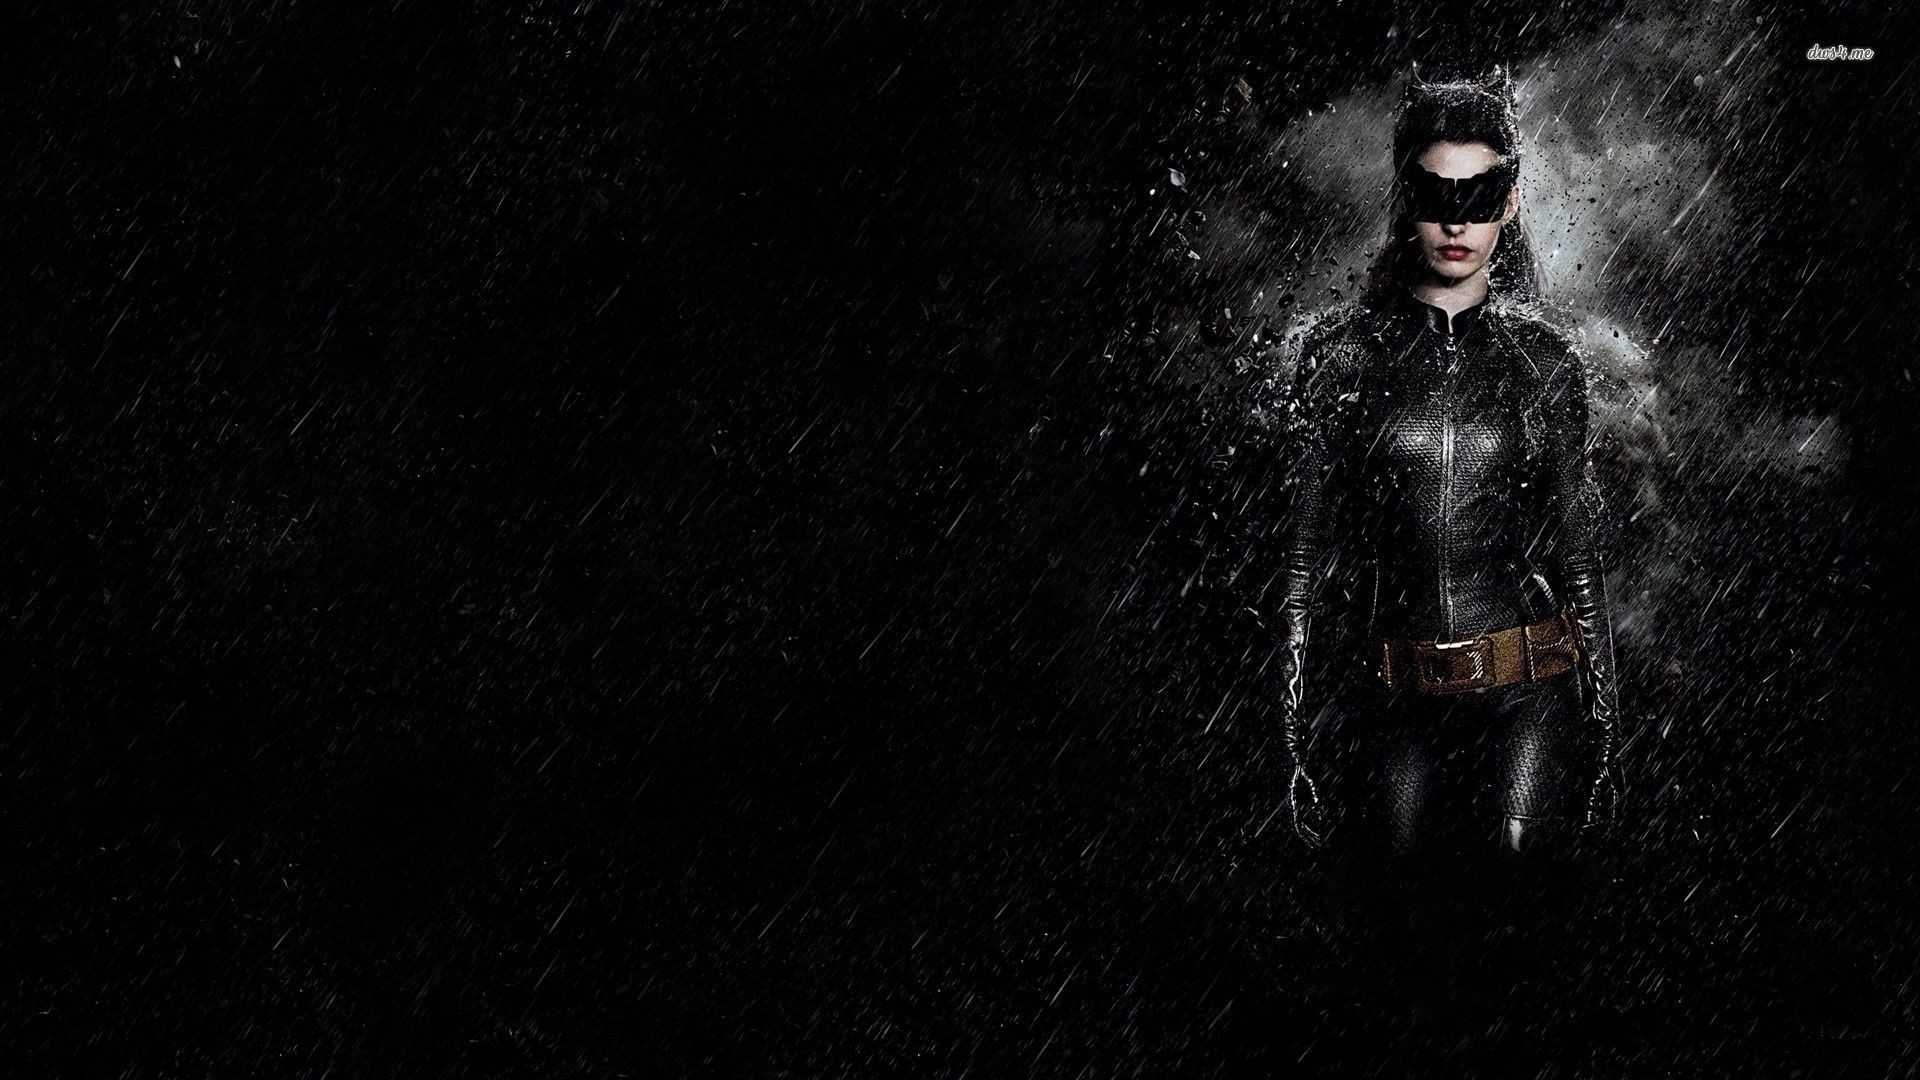 1920x1080 ... Anne Hathaway as Catwoman in The Dark Knight Rises wallpaper   ...